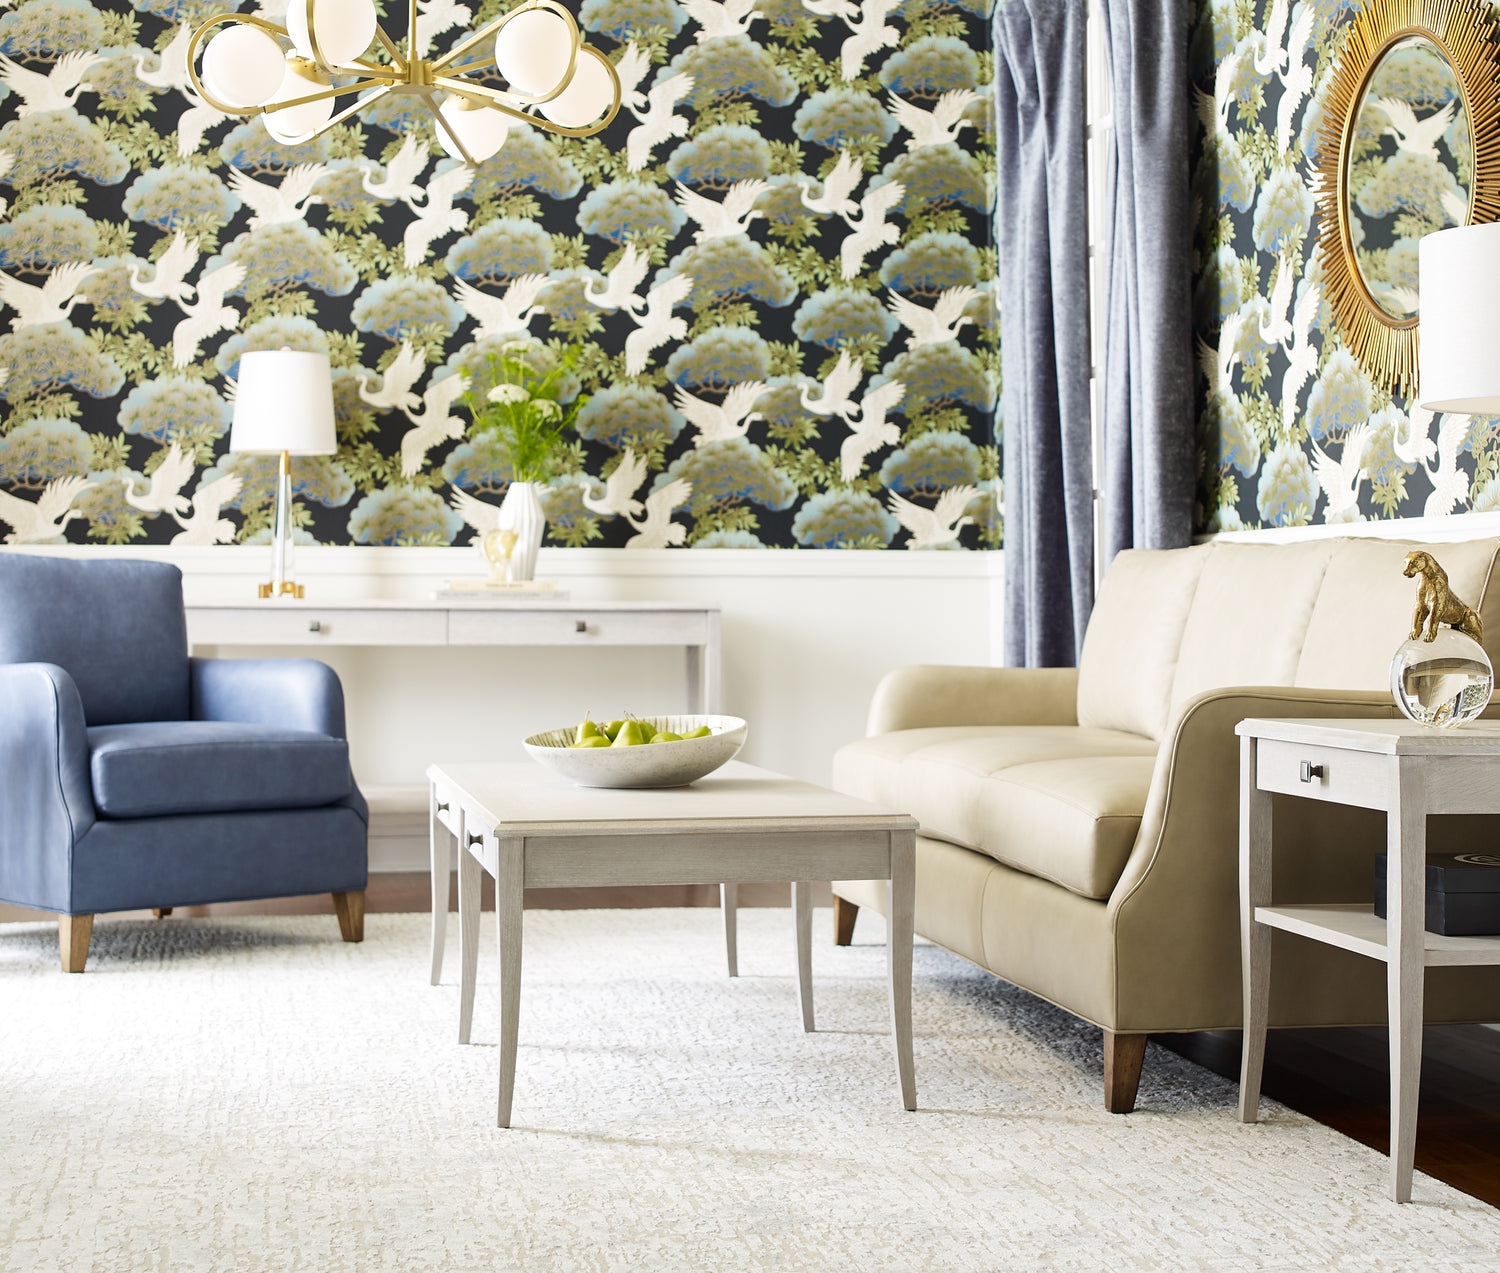 Origins by Stickley upholstery Harper living room setup showcasing a side view of a tan sofa, a blue leather chair, and a white coffee table against a room lined with decorative green and blue wallpaper.